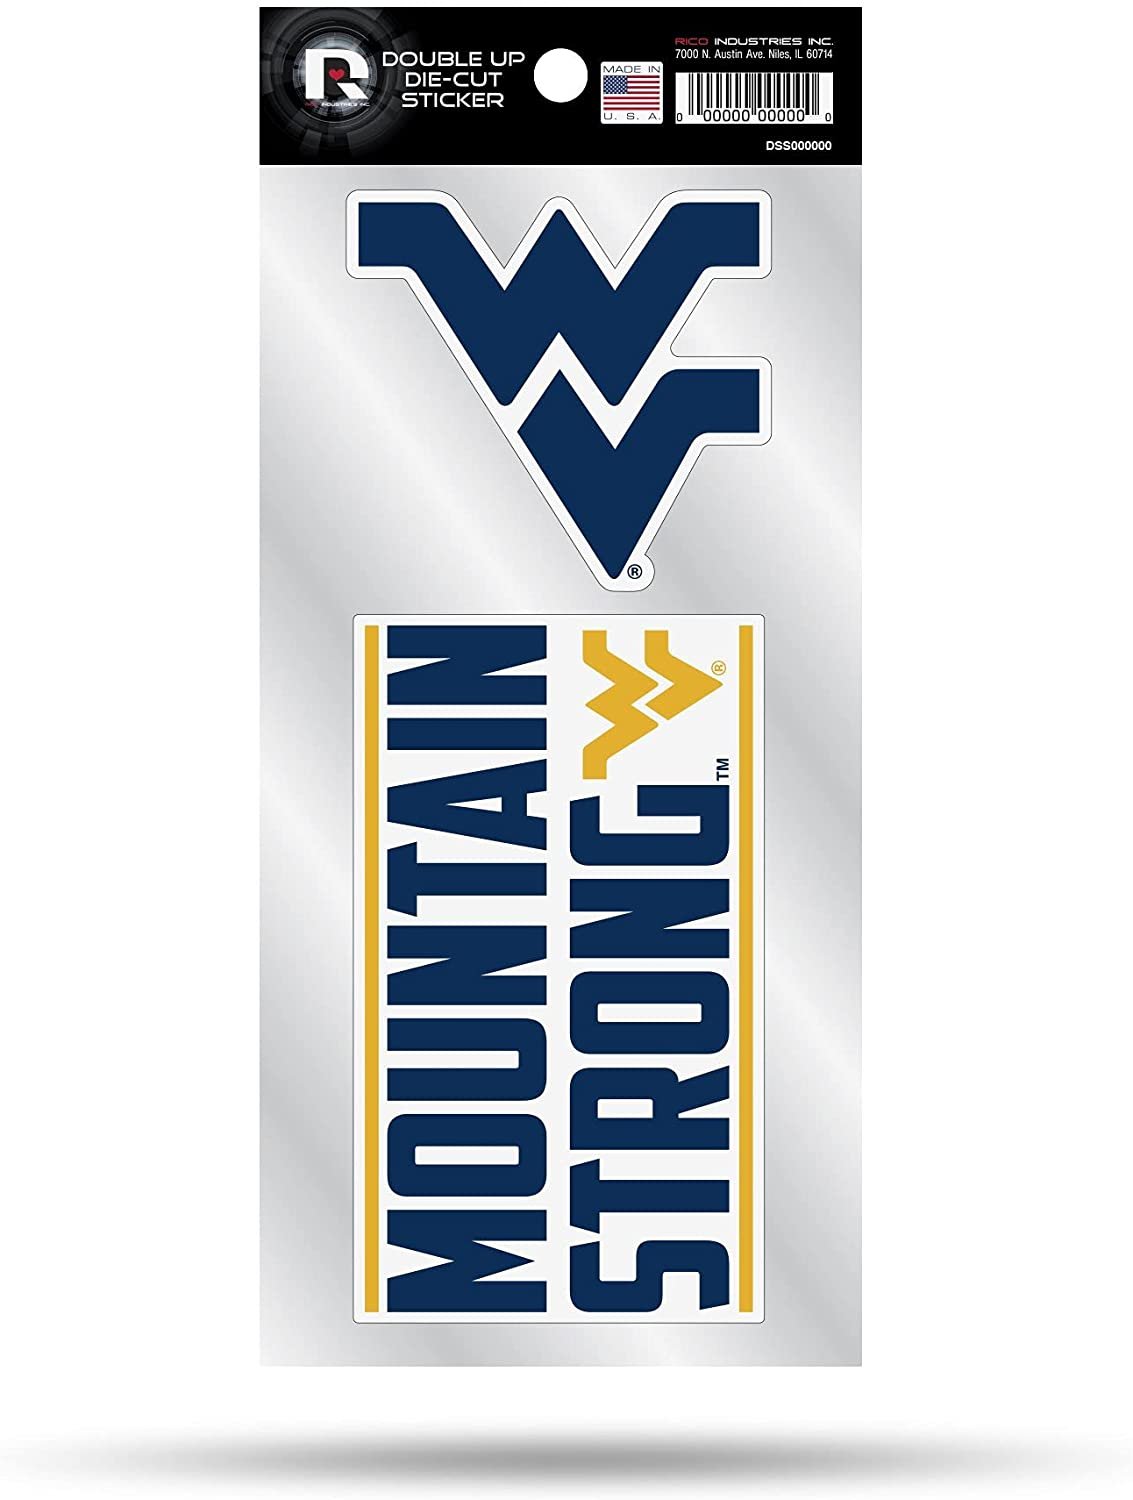 West Virginia University Mountaineers 2-Piece Double Up Die Cut Sticker Decal Sheet, 4x8 Inch